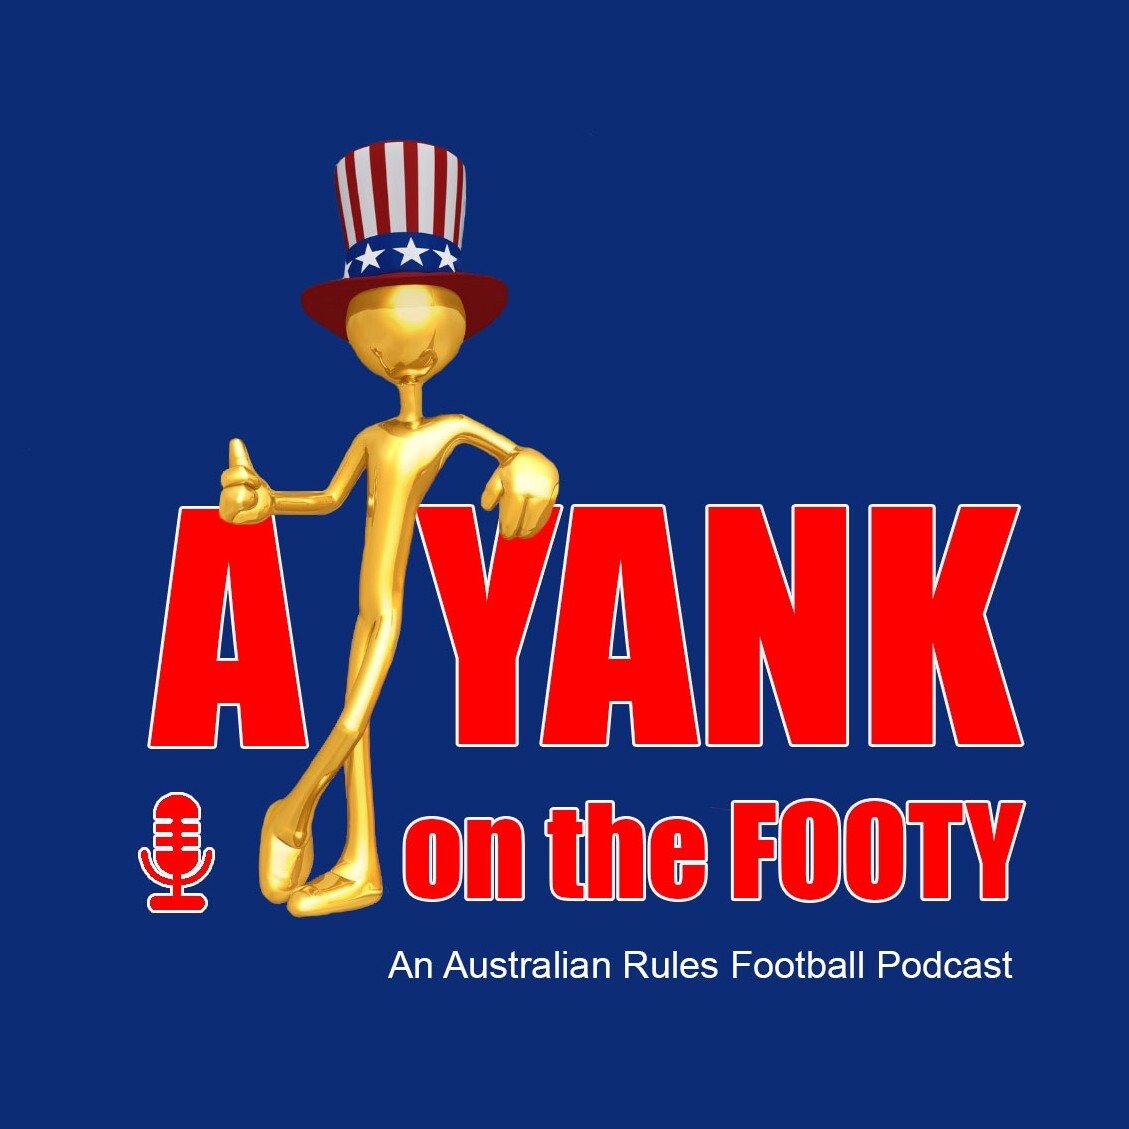 #165 - A Yank on the Footy - Rd. 8 Review, A really good weekend